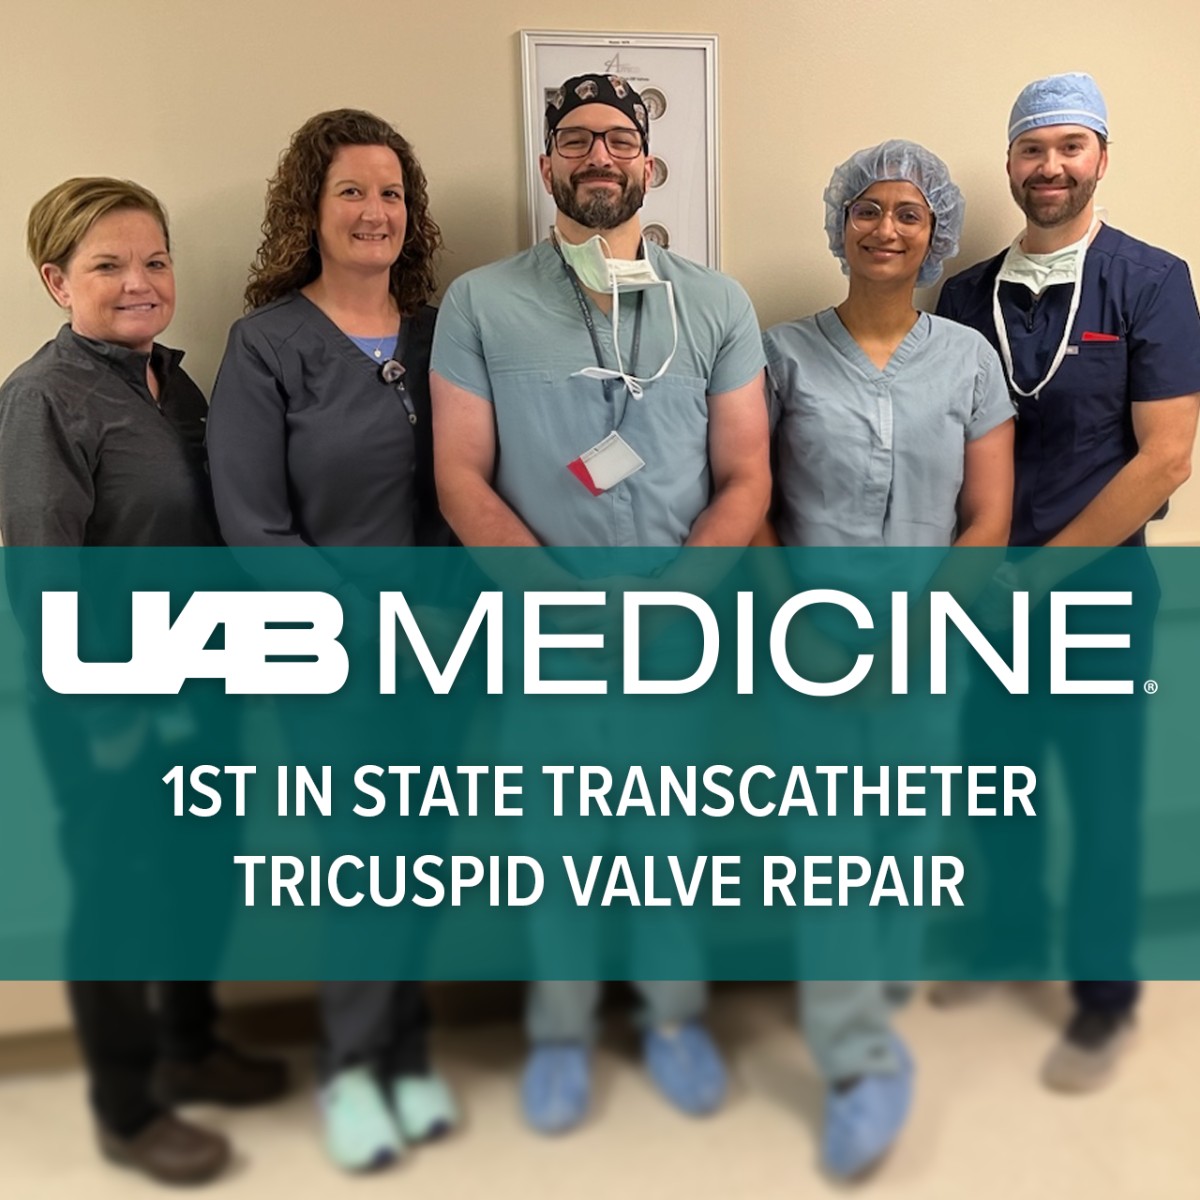 UAB Medicine recently became the first in Alabama to implant an FDA-approved device for patients with a leaky heart valve. This minimally invasive valve repair procedure is ideal for patients with #TricuspidRegurgitation who are not good candidates for open surgery.
#HeartHealth